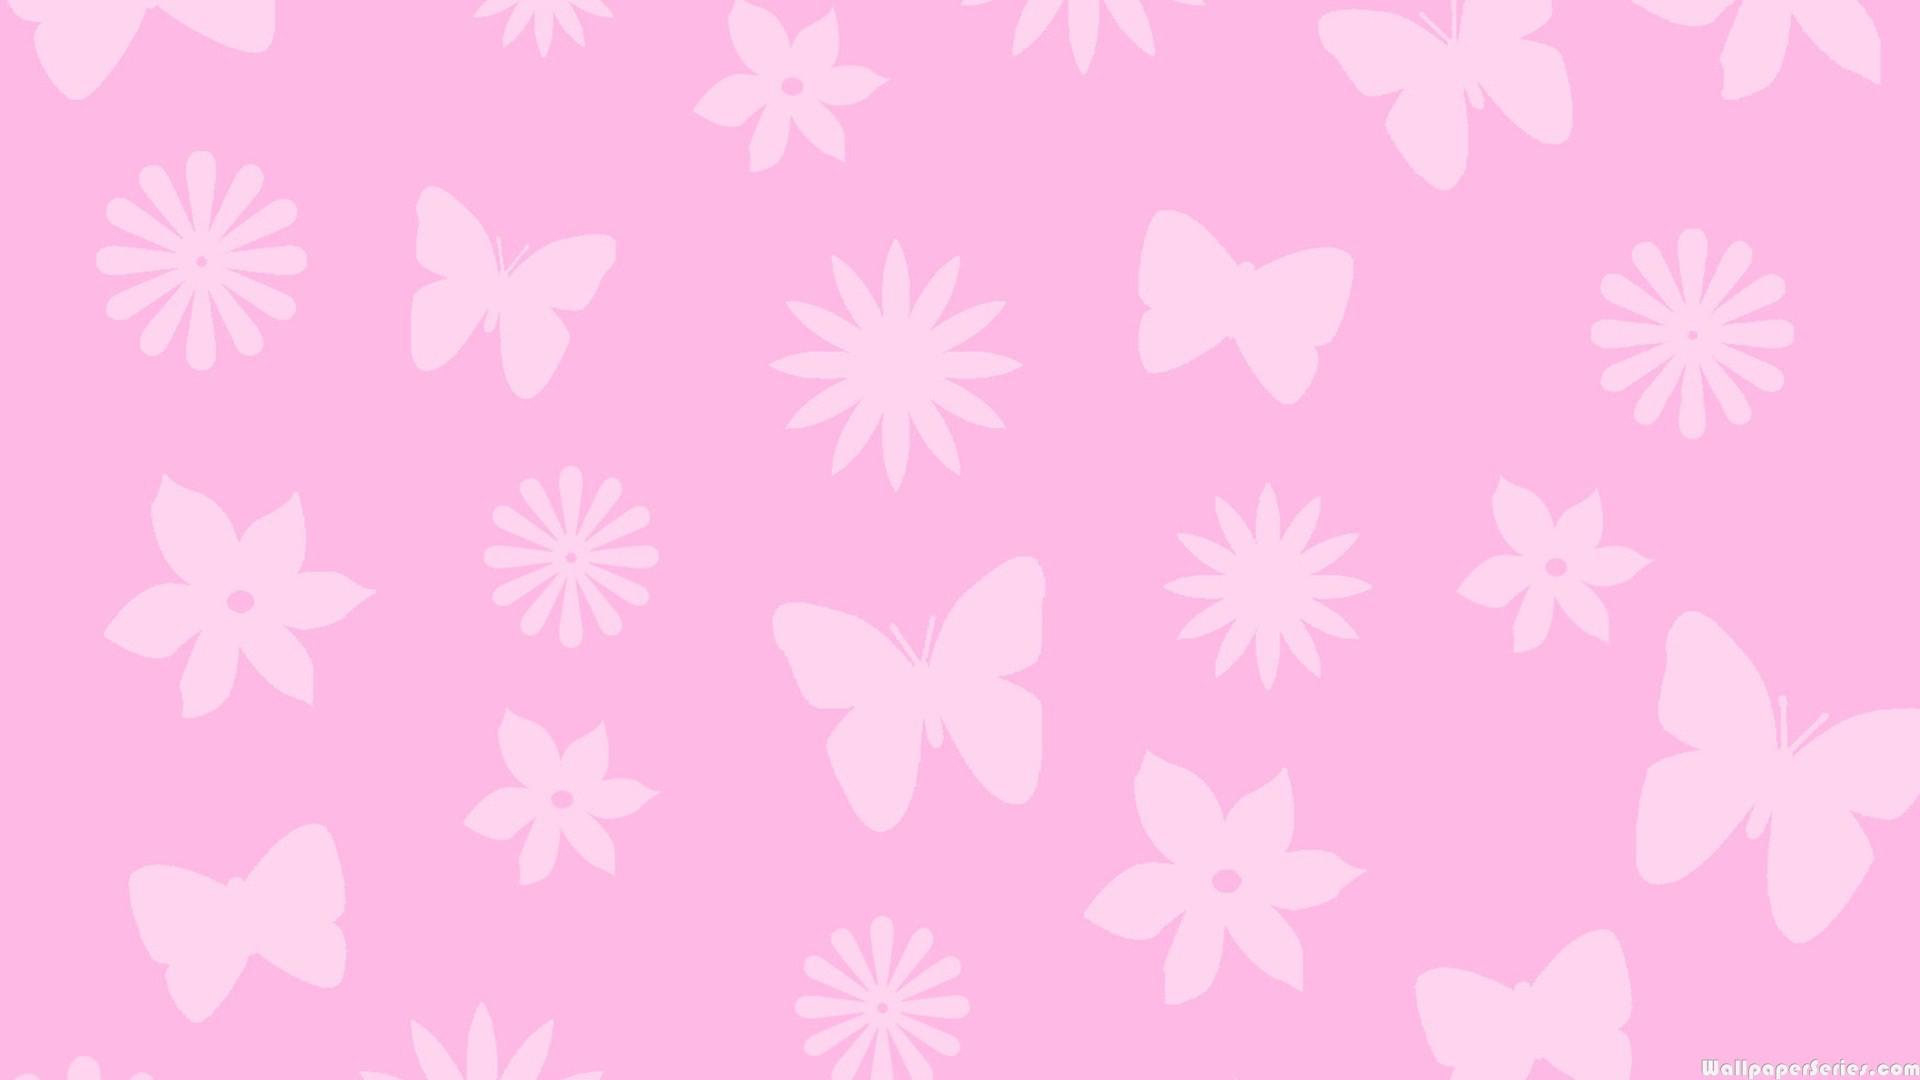 35 High Definition Pink Wallpapers/Backgrounds For Free ...